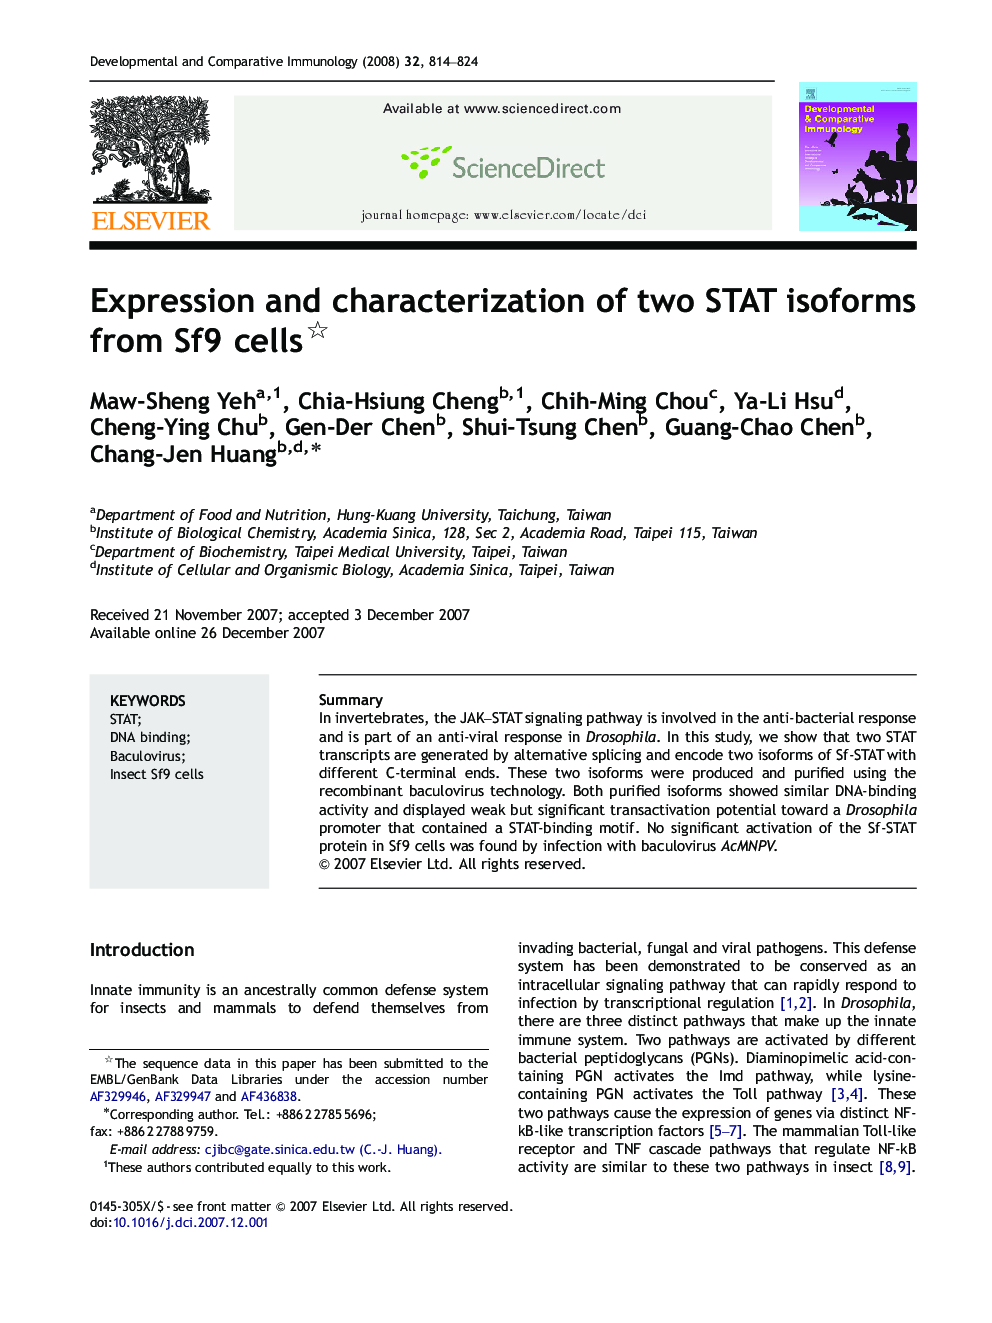 Expression and characterization of two STAT isoforms from Sf9 cells 